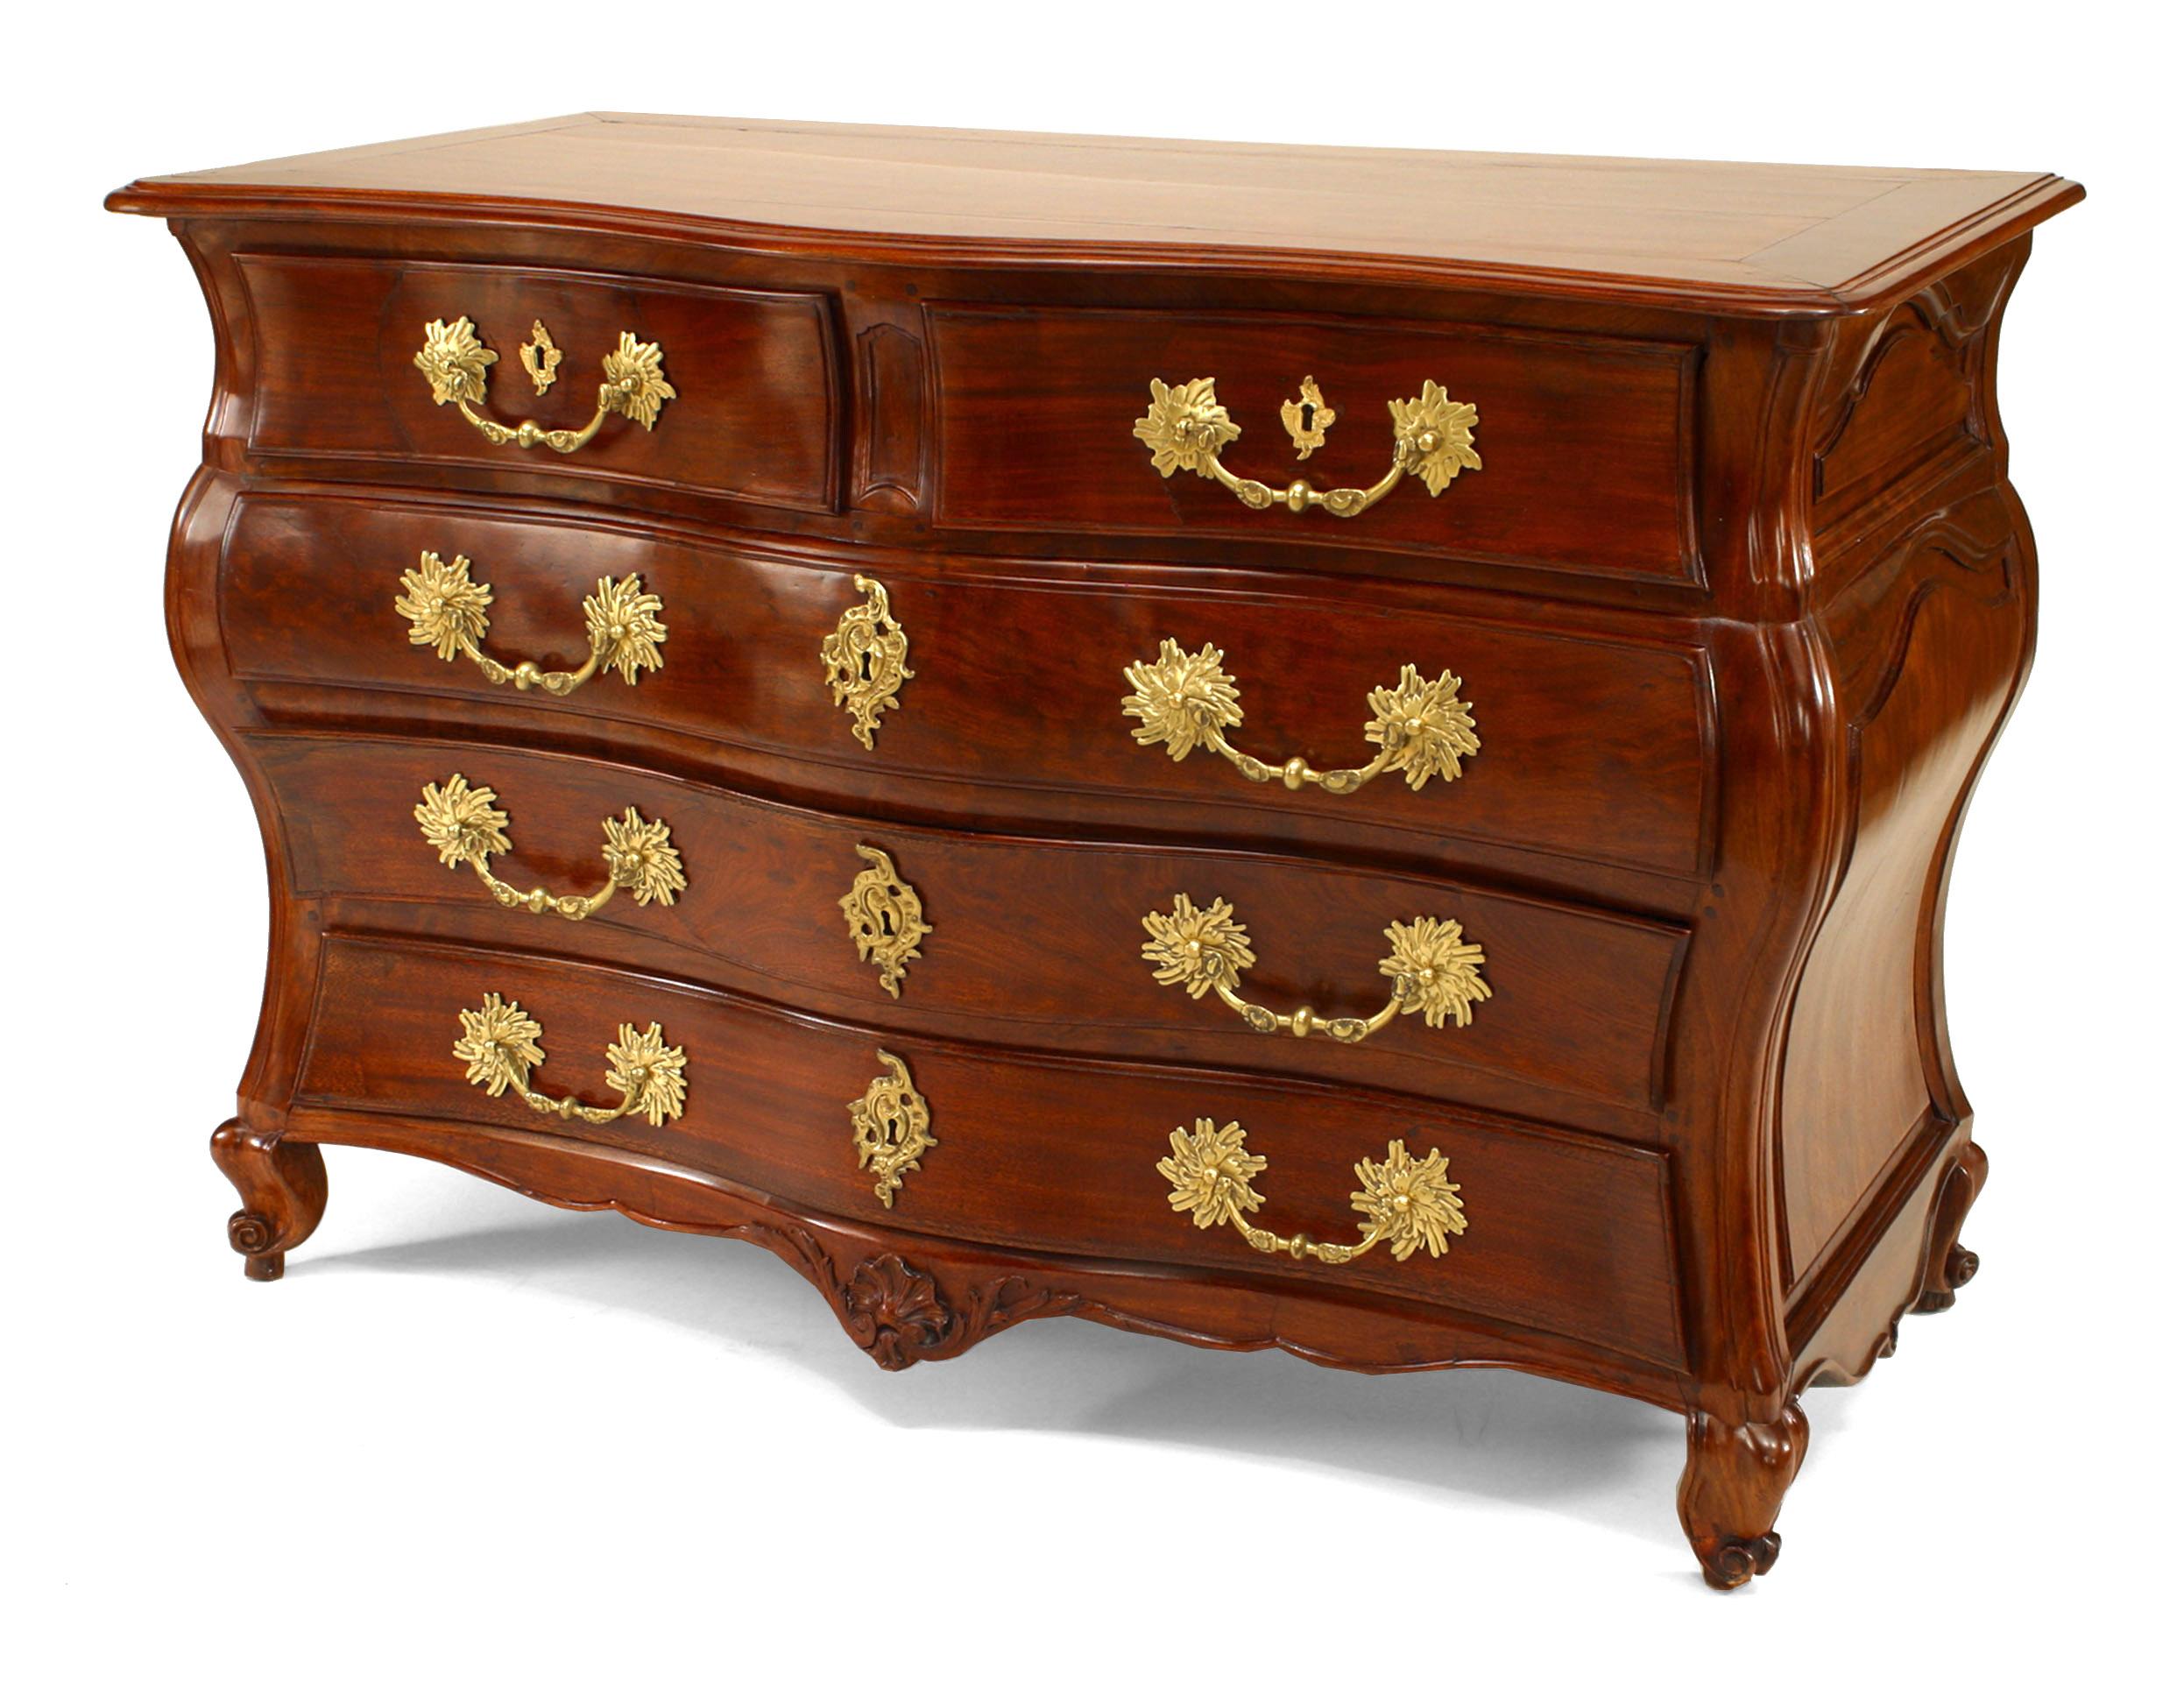 French Provincial Louis XV mahogany chest of drawers with bombe shape and 3 full drawers below a Pair of drawers all with bronze handles (PORT FURNITURE).
